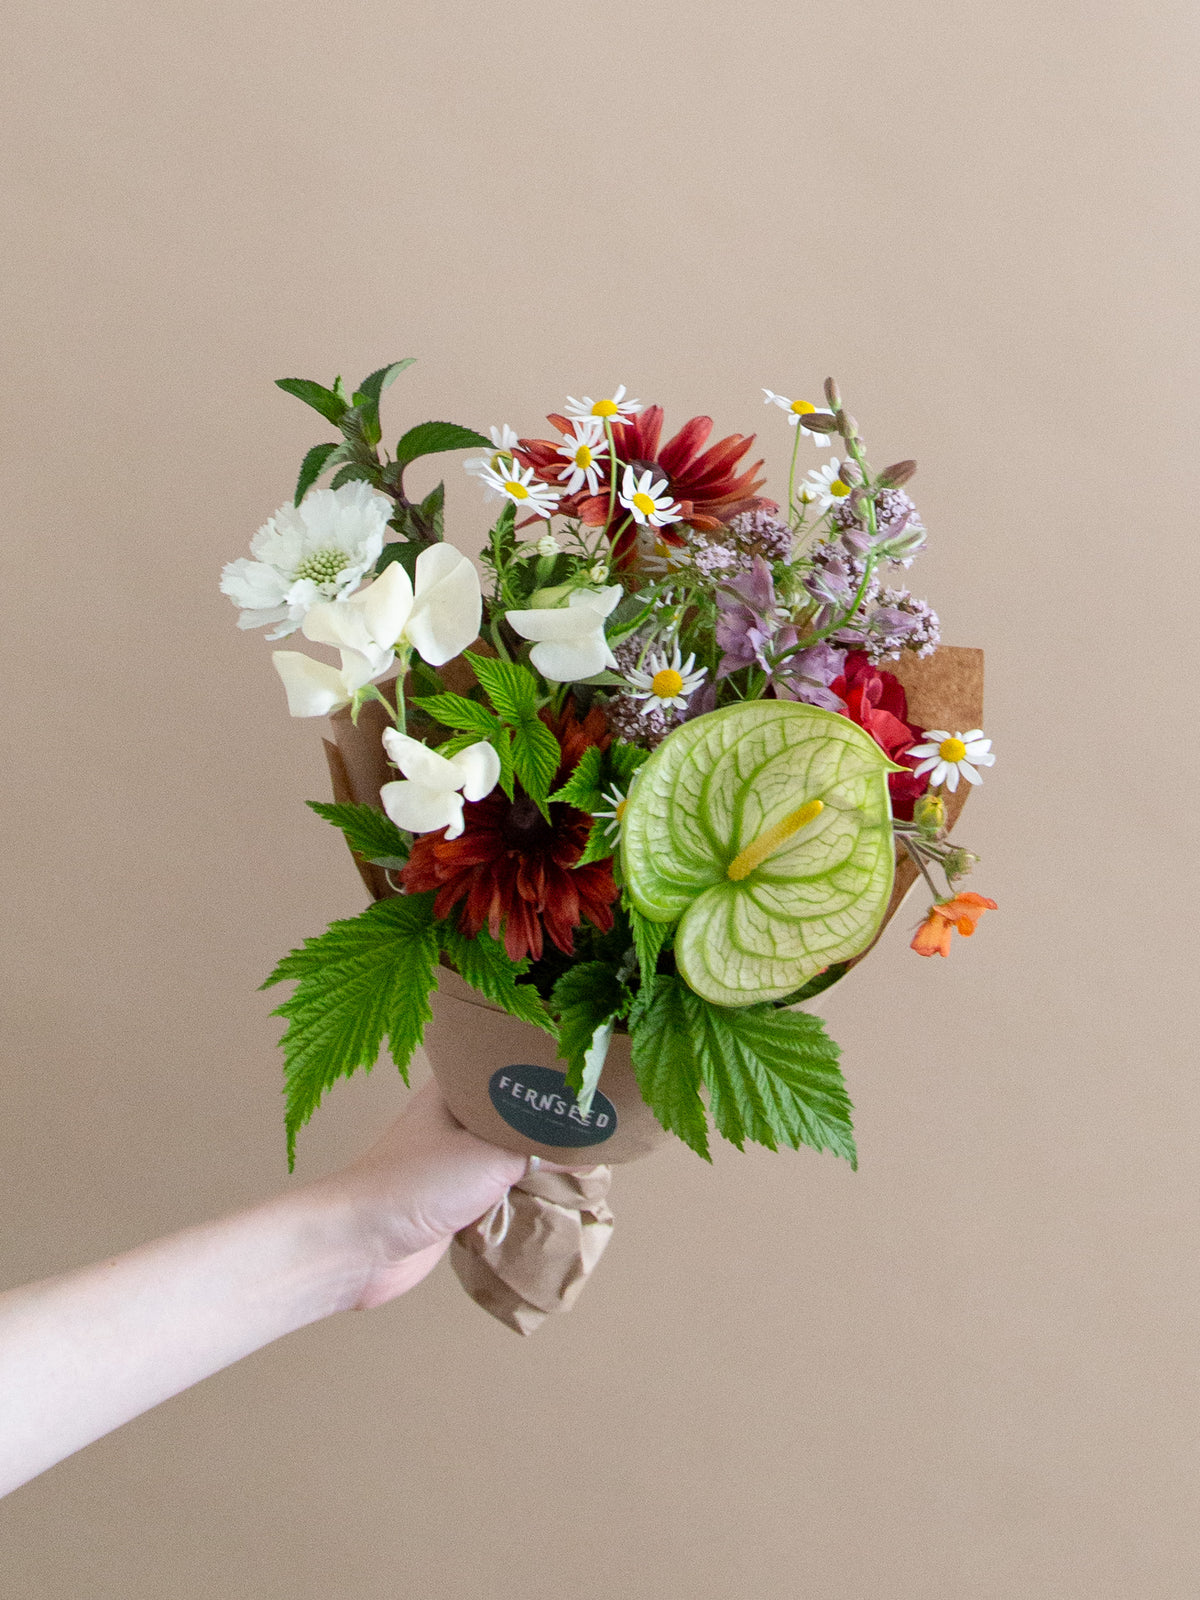 Monthly Flower Subscription: 6 Month Pre-Paid